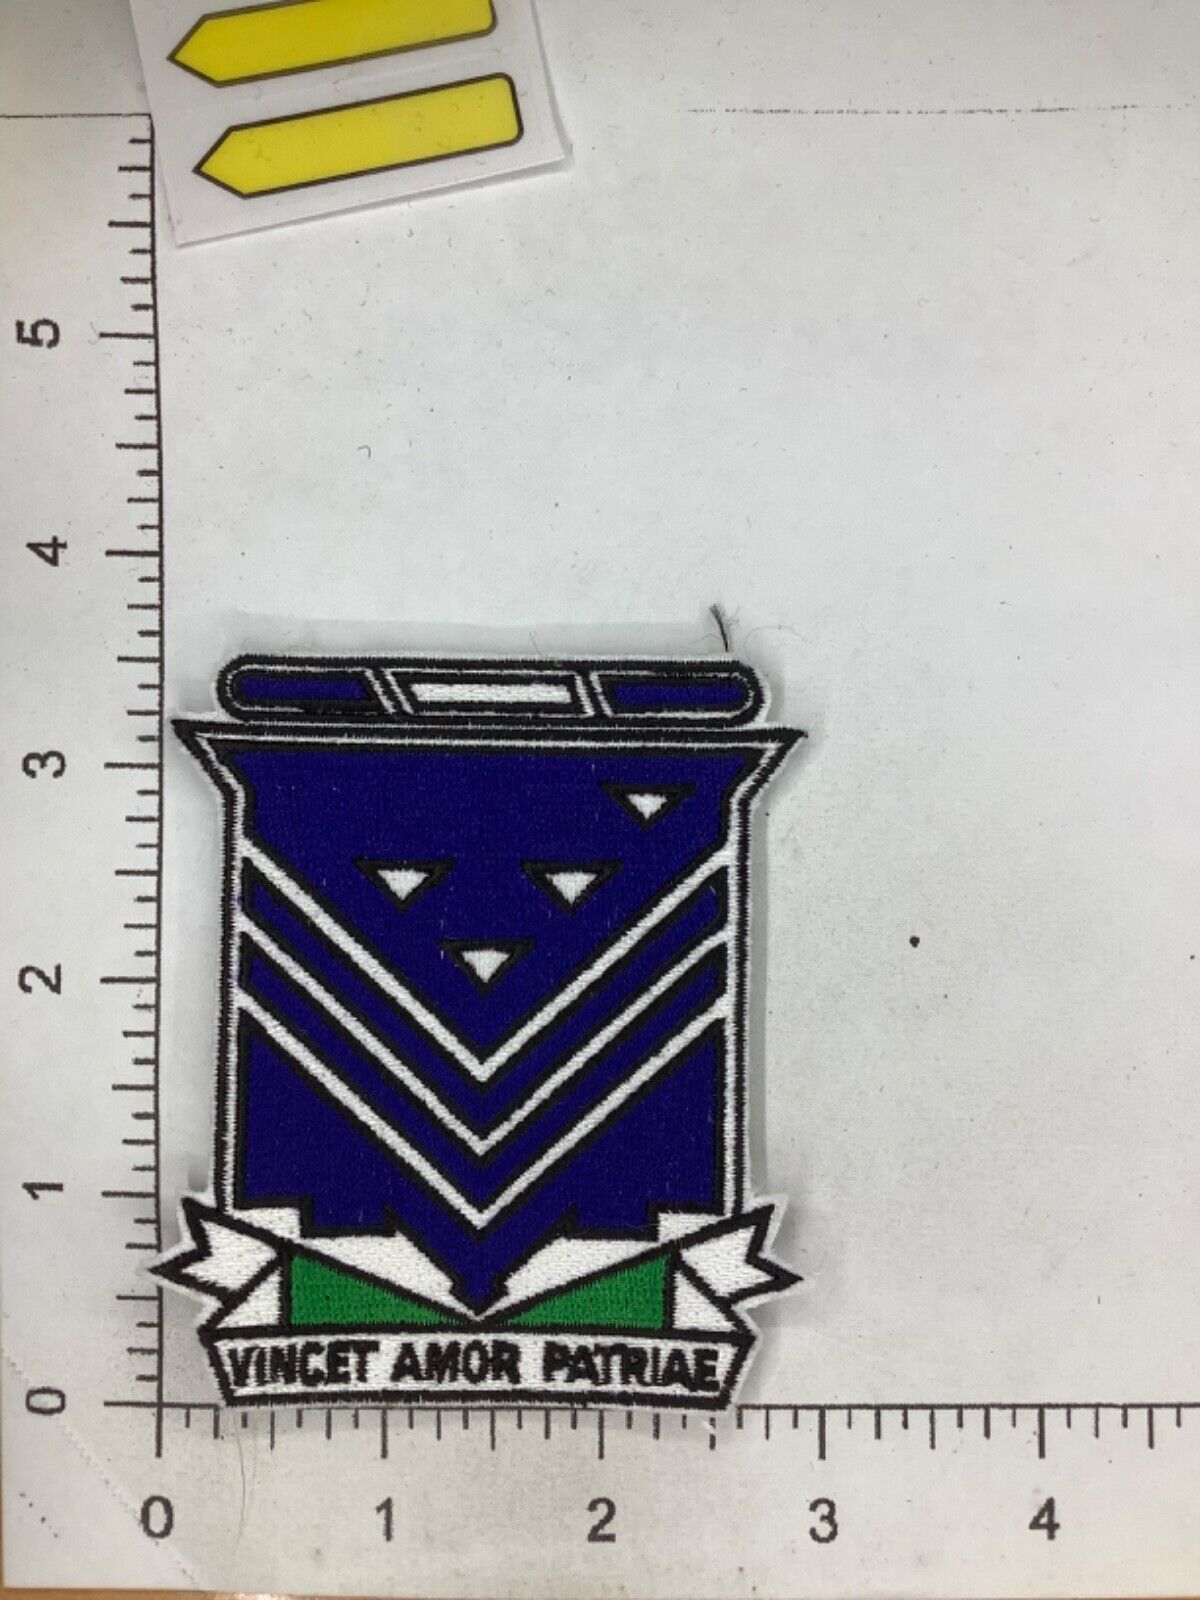 USAF 116th BOMB WING SQUADRON PATCH